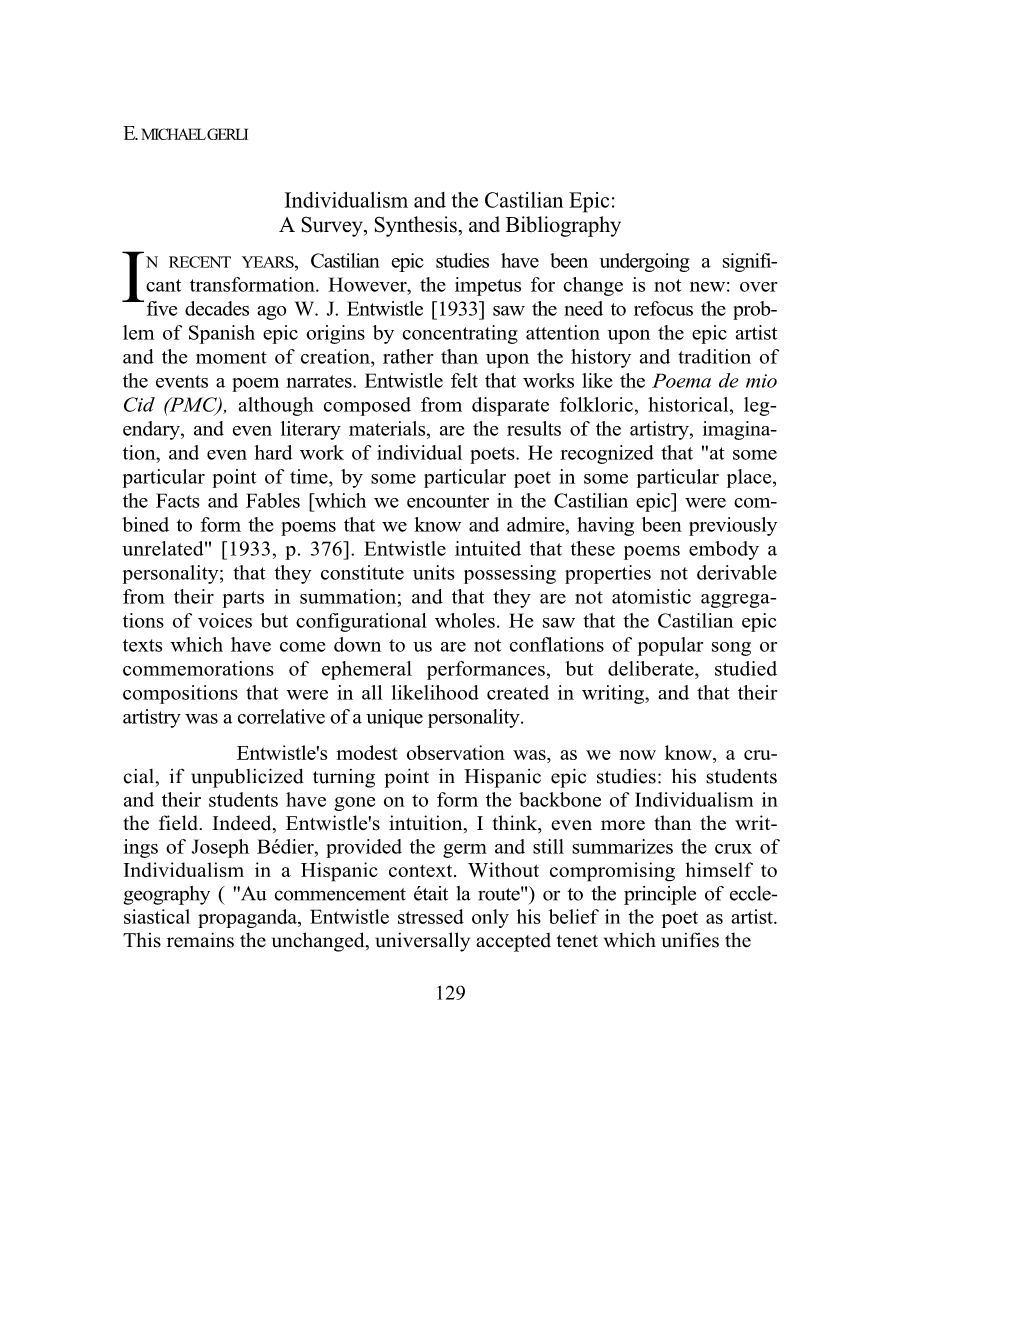 Individualism and the Castilian Epic: a Survey, Synthesis, and Bibliography